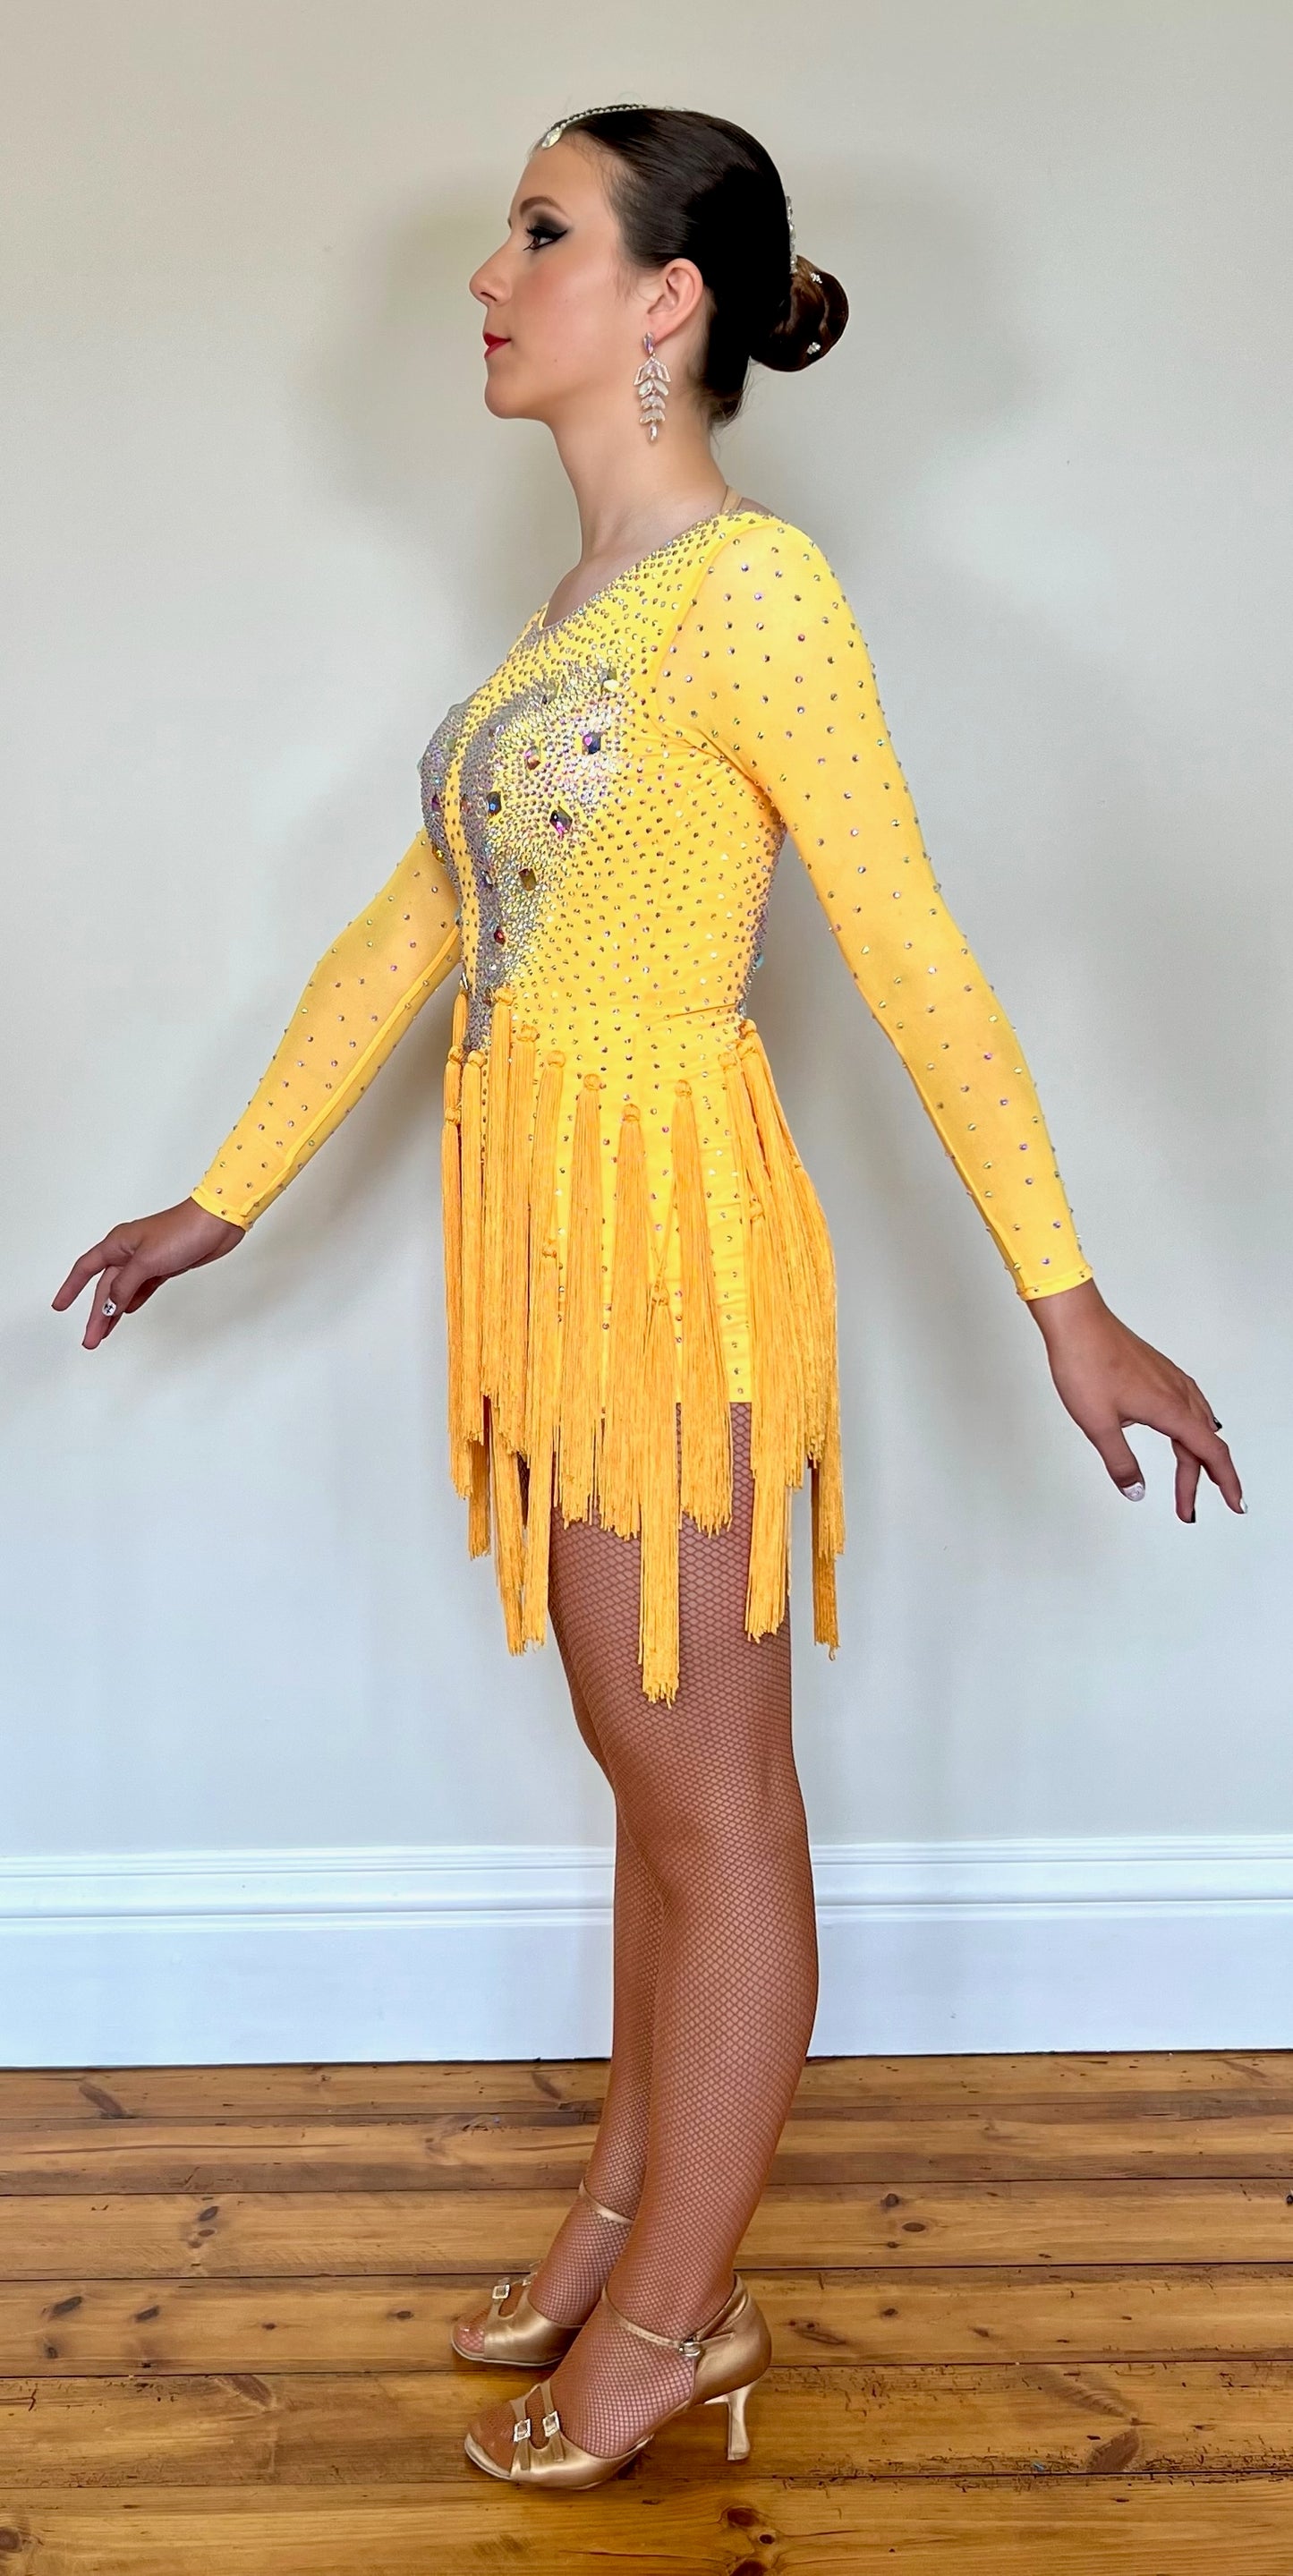 021 Golden Yellow tasseled skirt Latin dress. Decorated in AB with stoned sleeves.